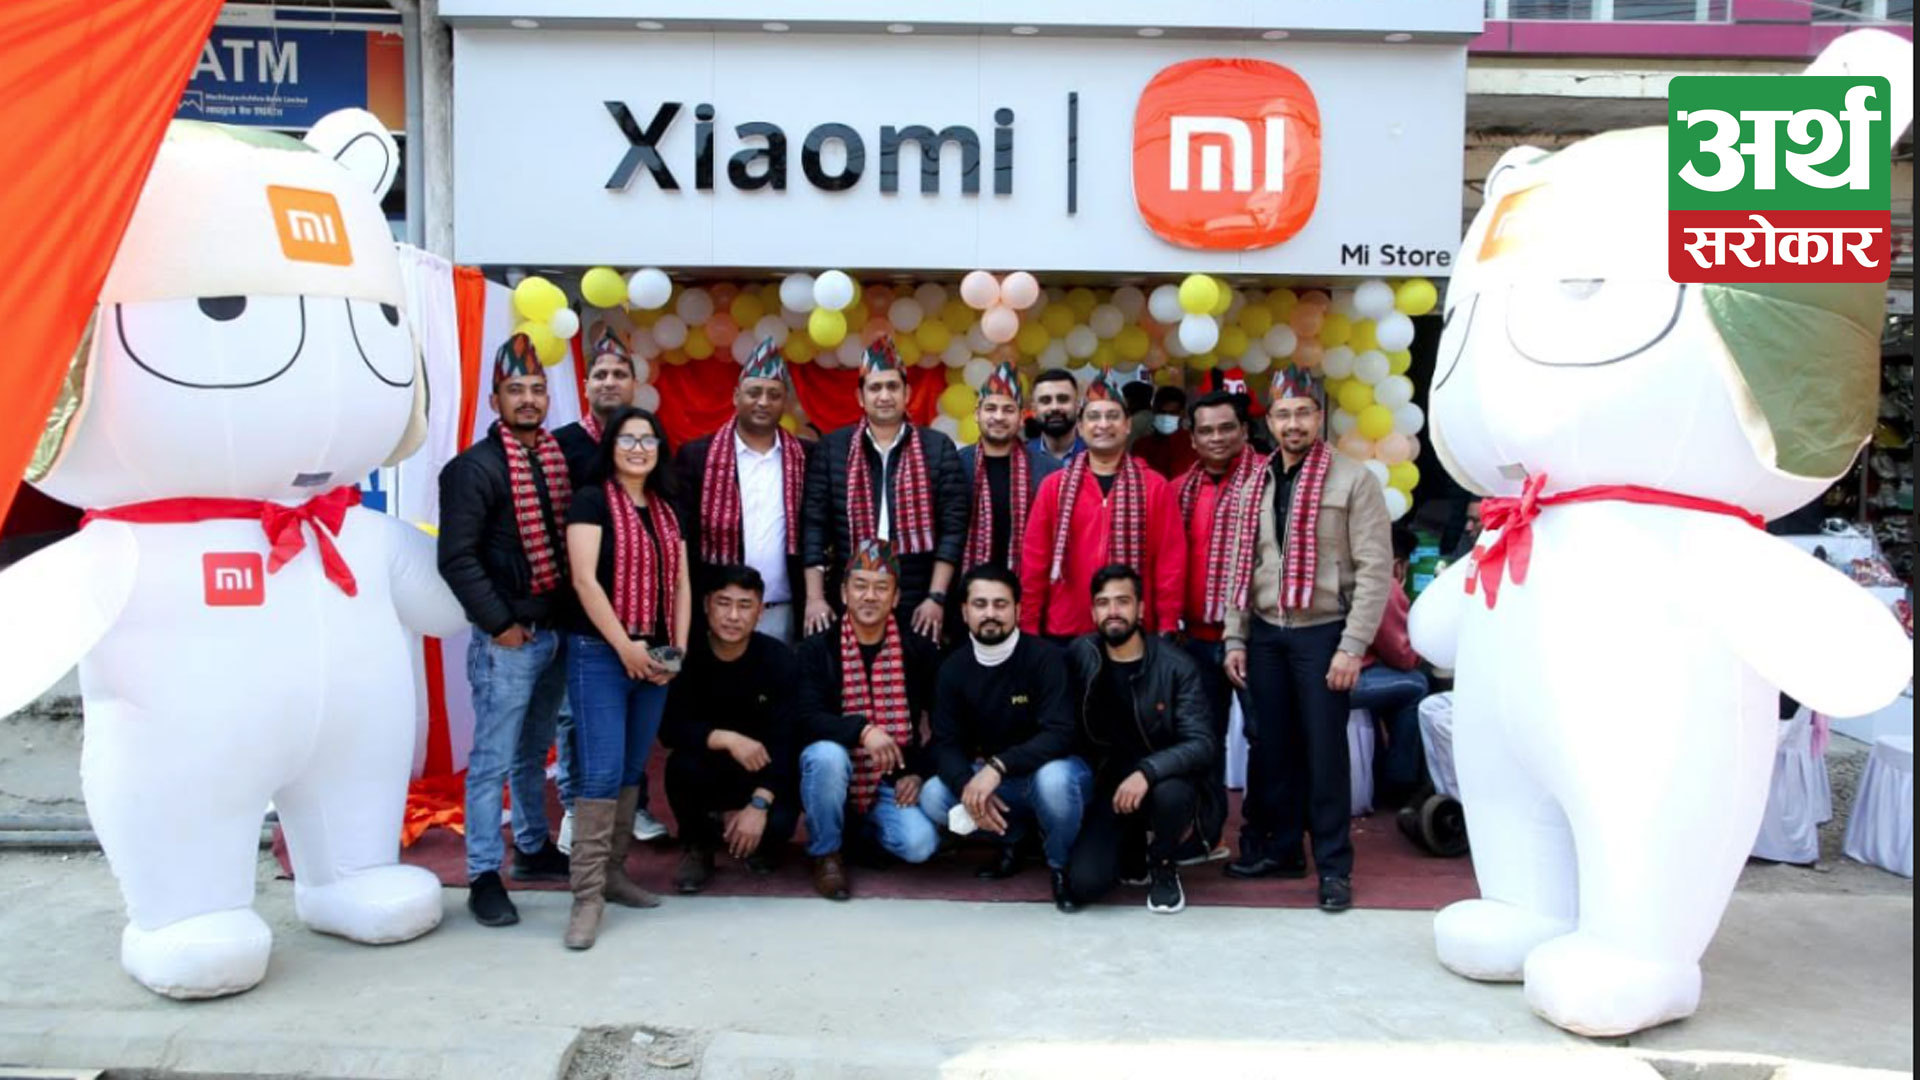 Xiaomi targets to double down the number of Mi Stores in Nepal